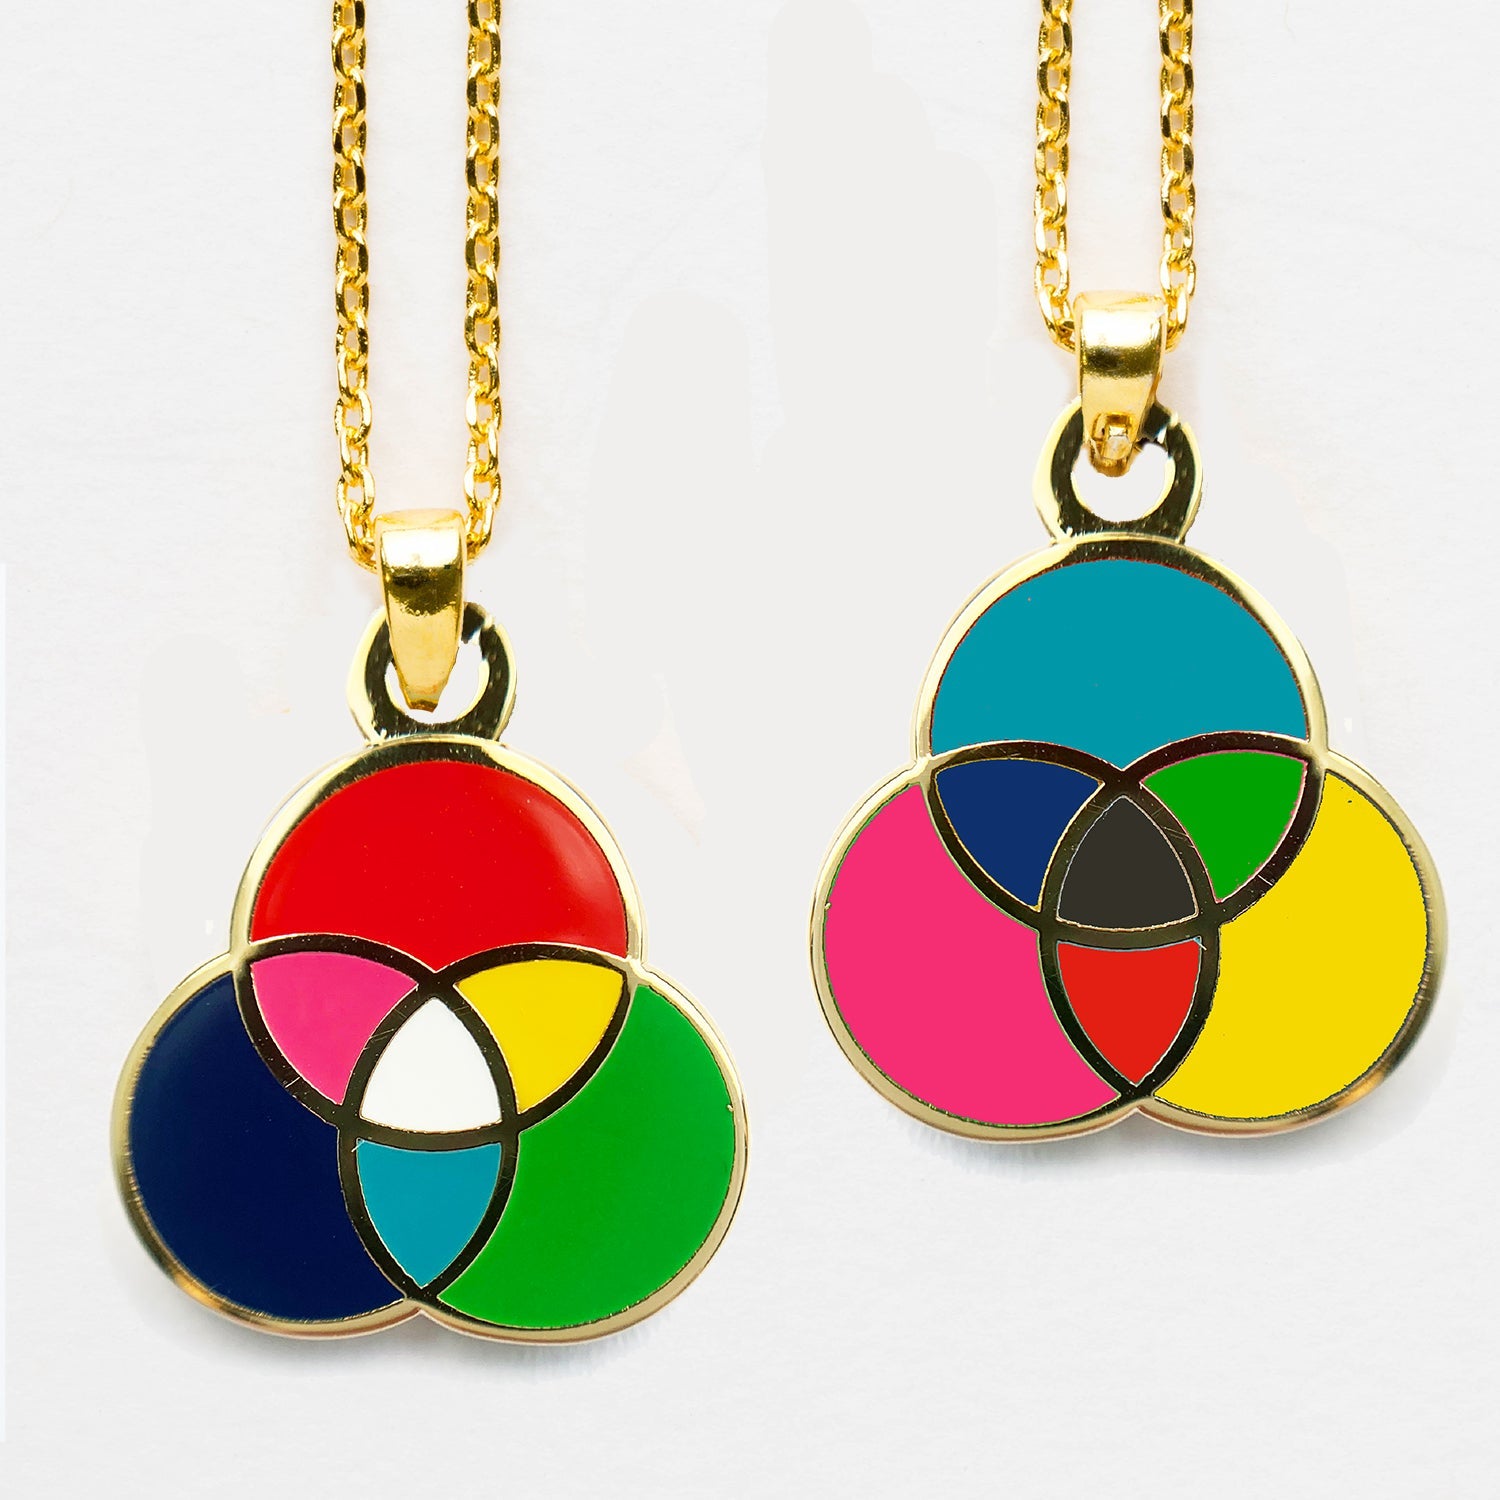 color chart pendant necklace on white background.